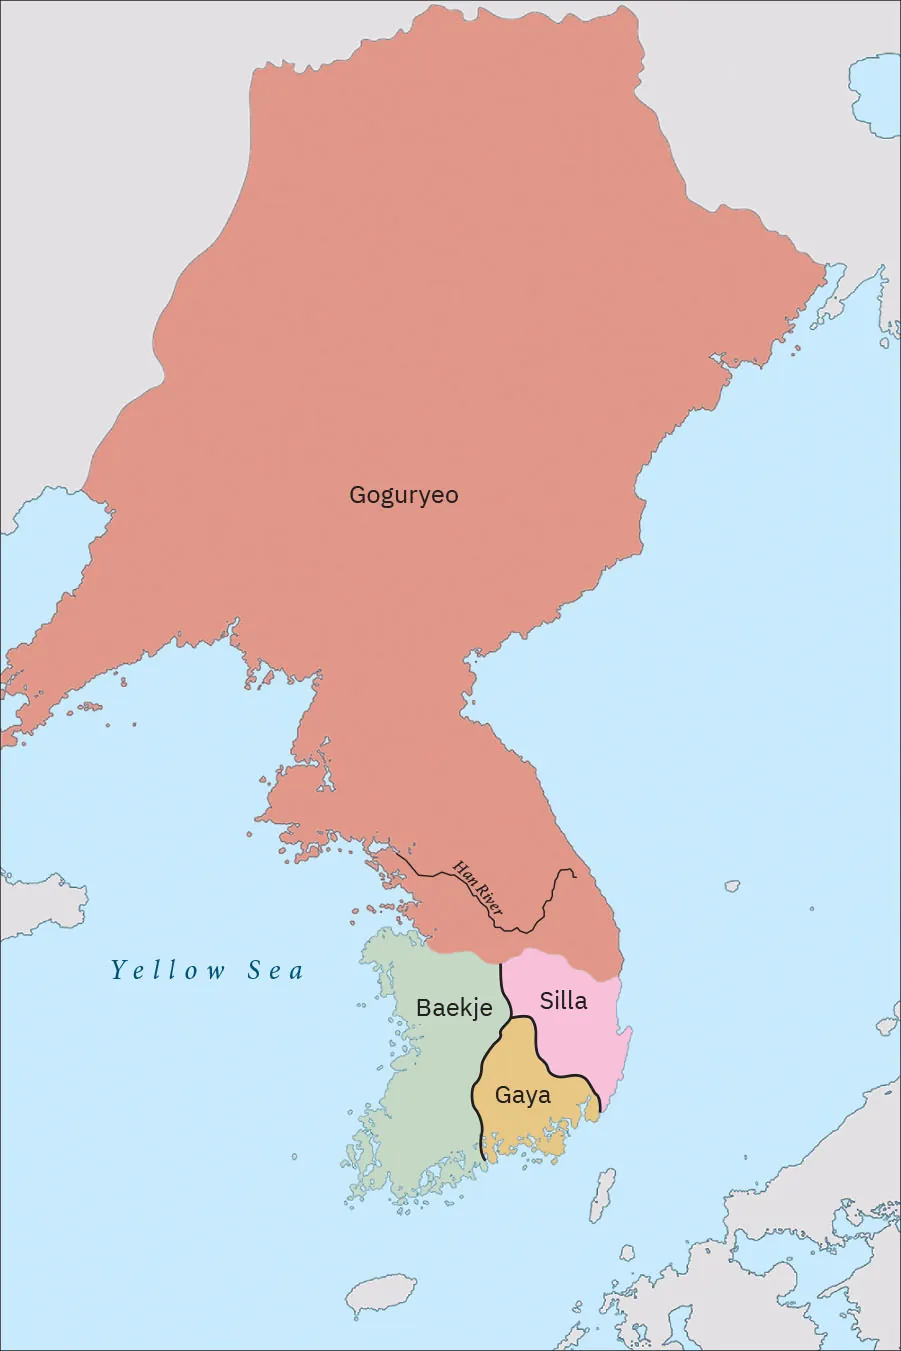 A map of the Korean Peninsula. The Yellow Sea is labeled. A large section of land in the north is highlighted orange and labelled “Goguryeo.” In the south are three smaller areas labelled: Baekje (green), Silla (pink) and Gaya (yellow). The Han River is labelled and in Goguryeo.